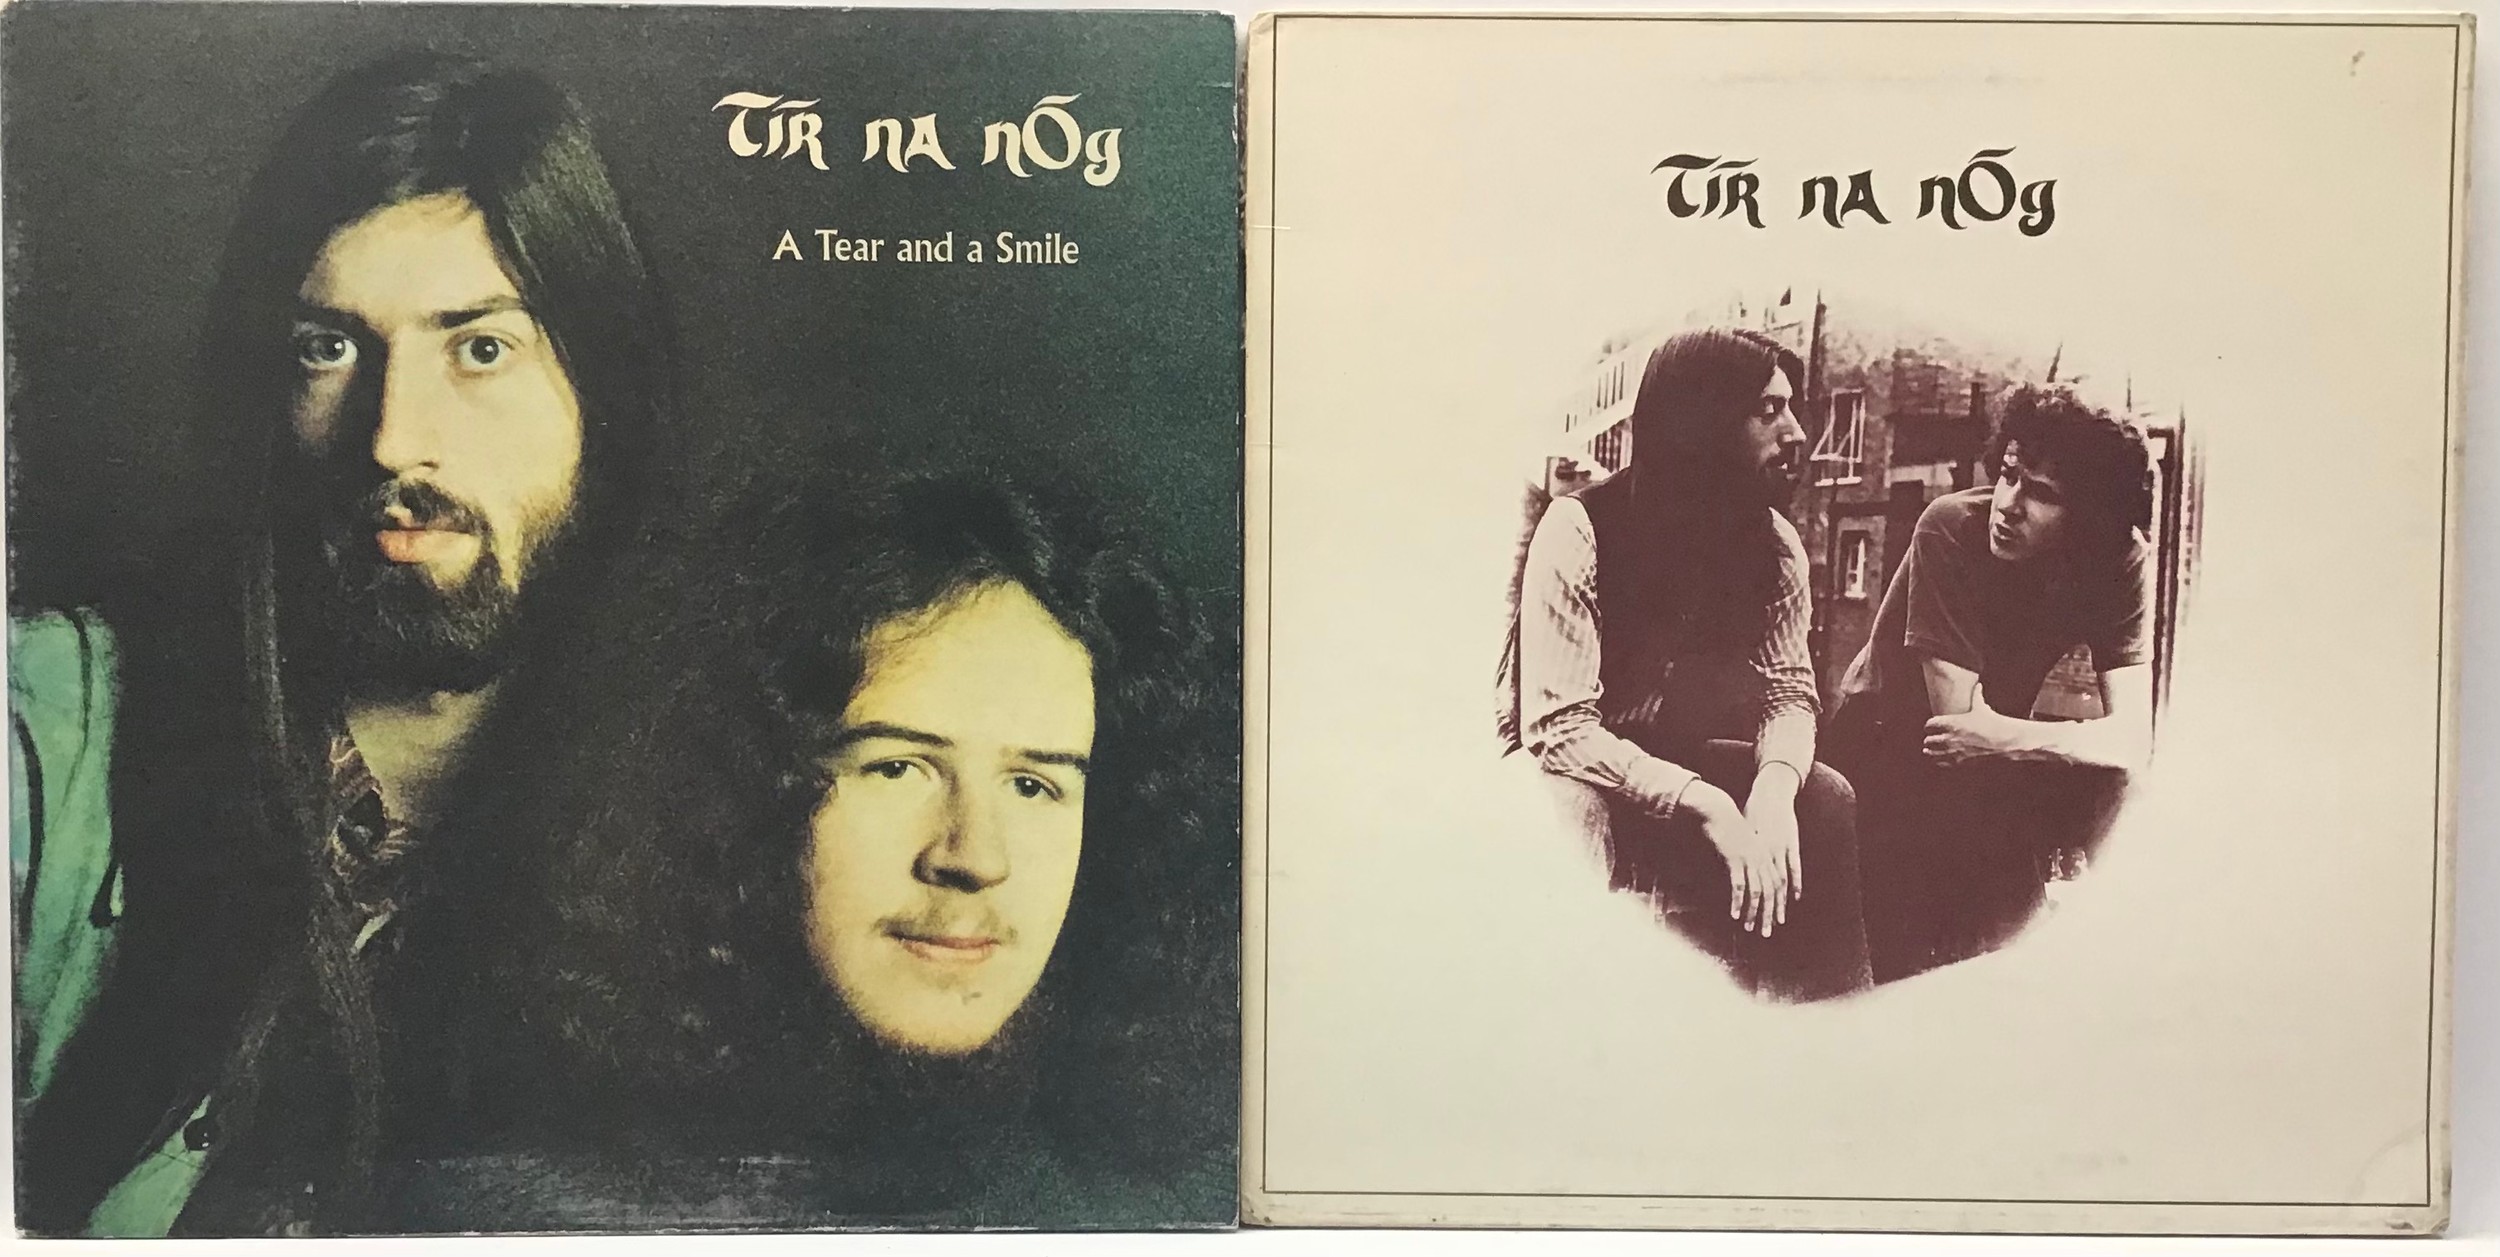 TIR NA NOG VINYL LP RECORDS X 2. Here we find their debut album plus ‘A Tear And A Smile’ both